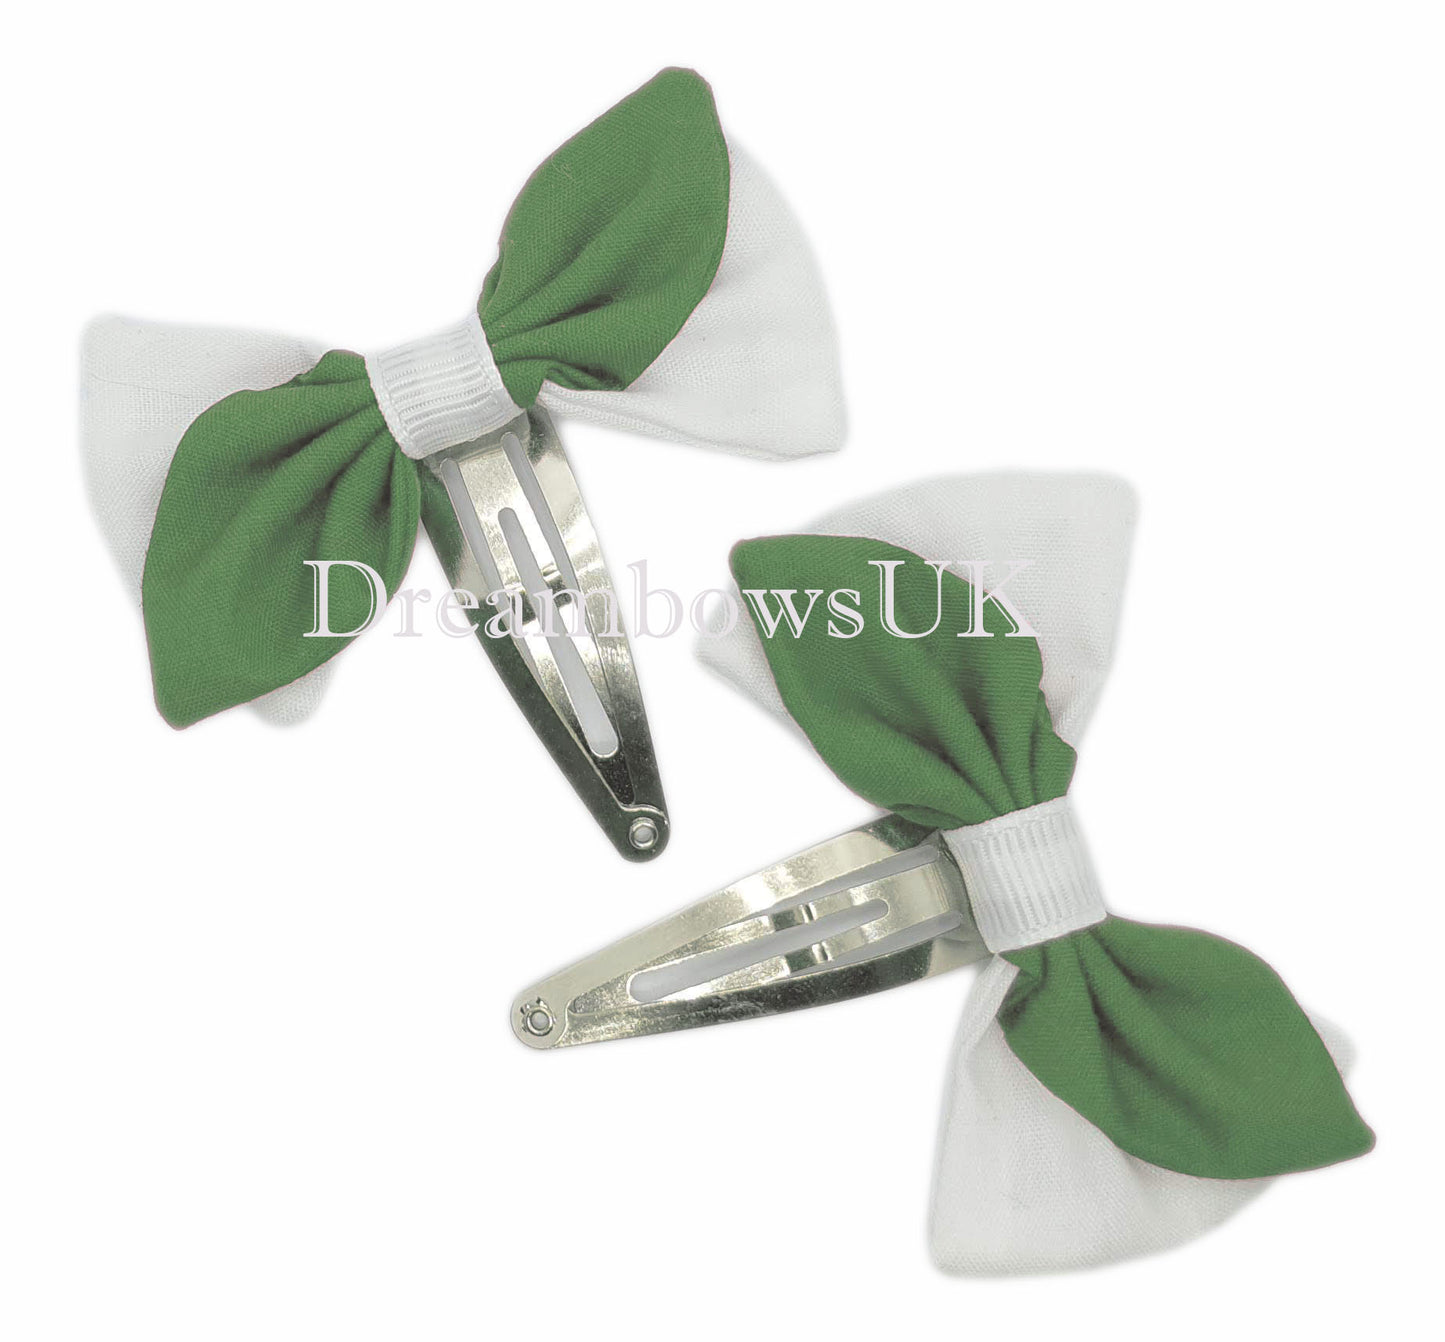 2x Emerald green and white fabric hair bows